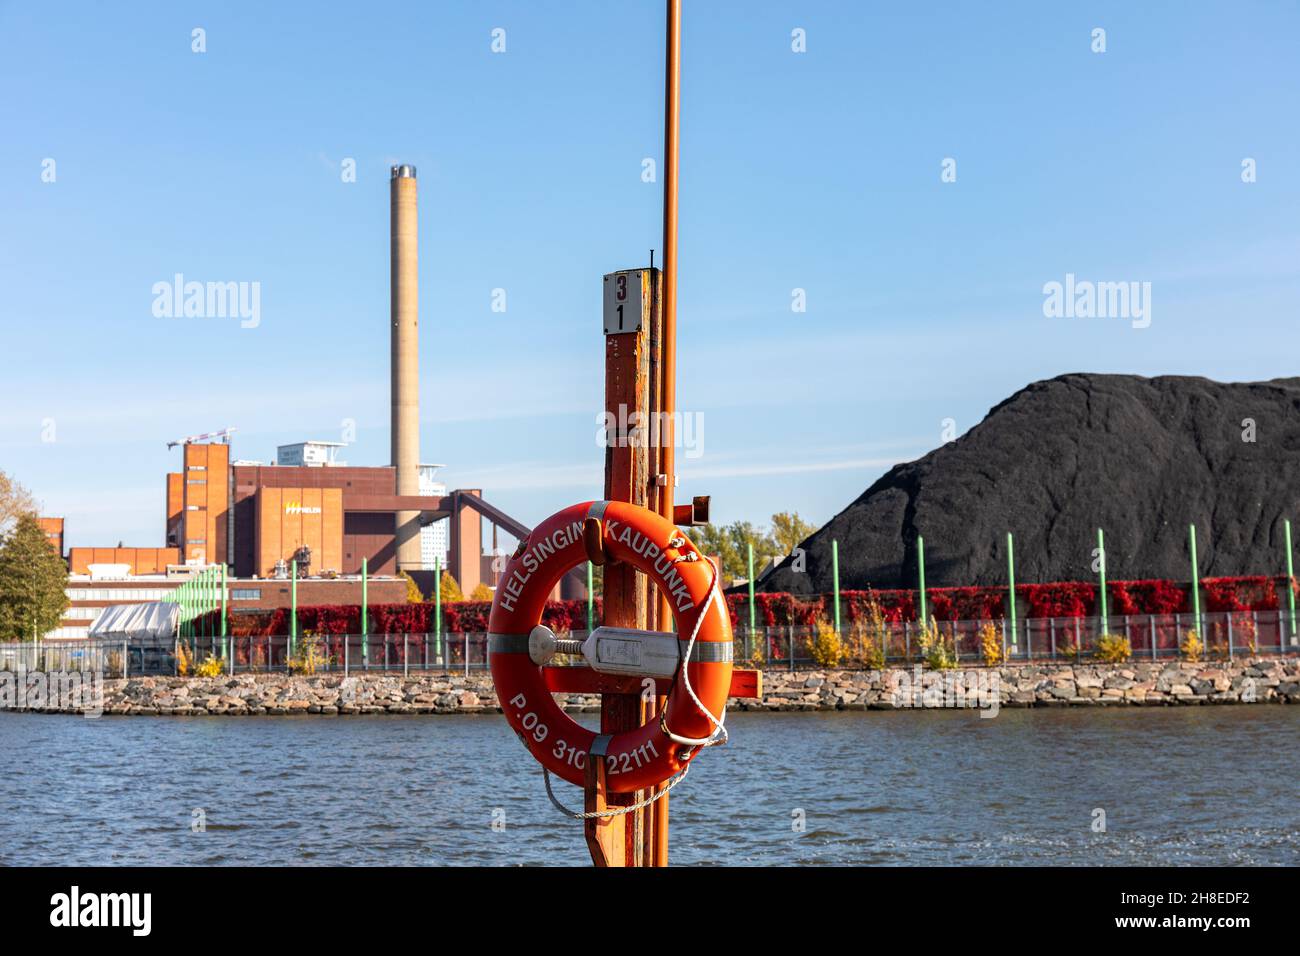 Life buoy in the foreground, Hanasaari Power Plant and coal stock in the background in Merihaka district of Helsinki, Finland Stock Photo